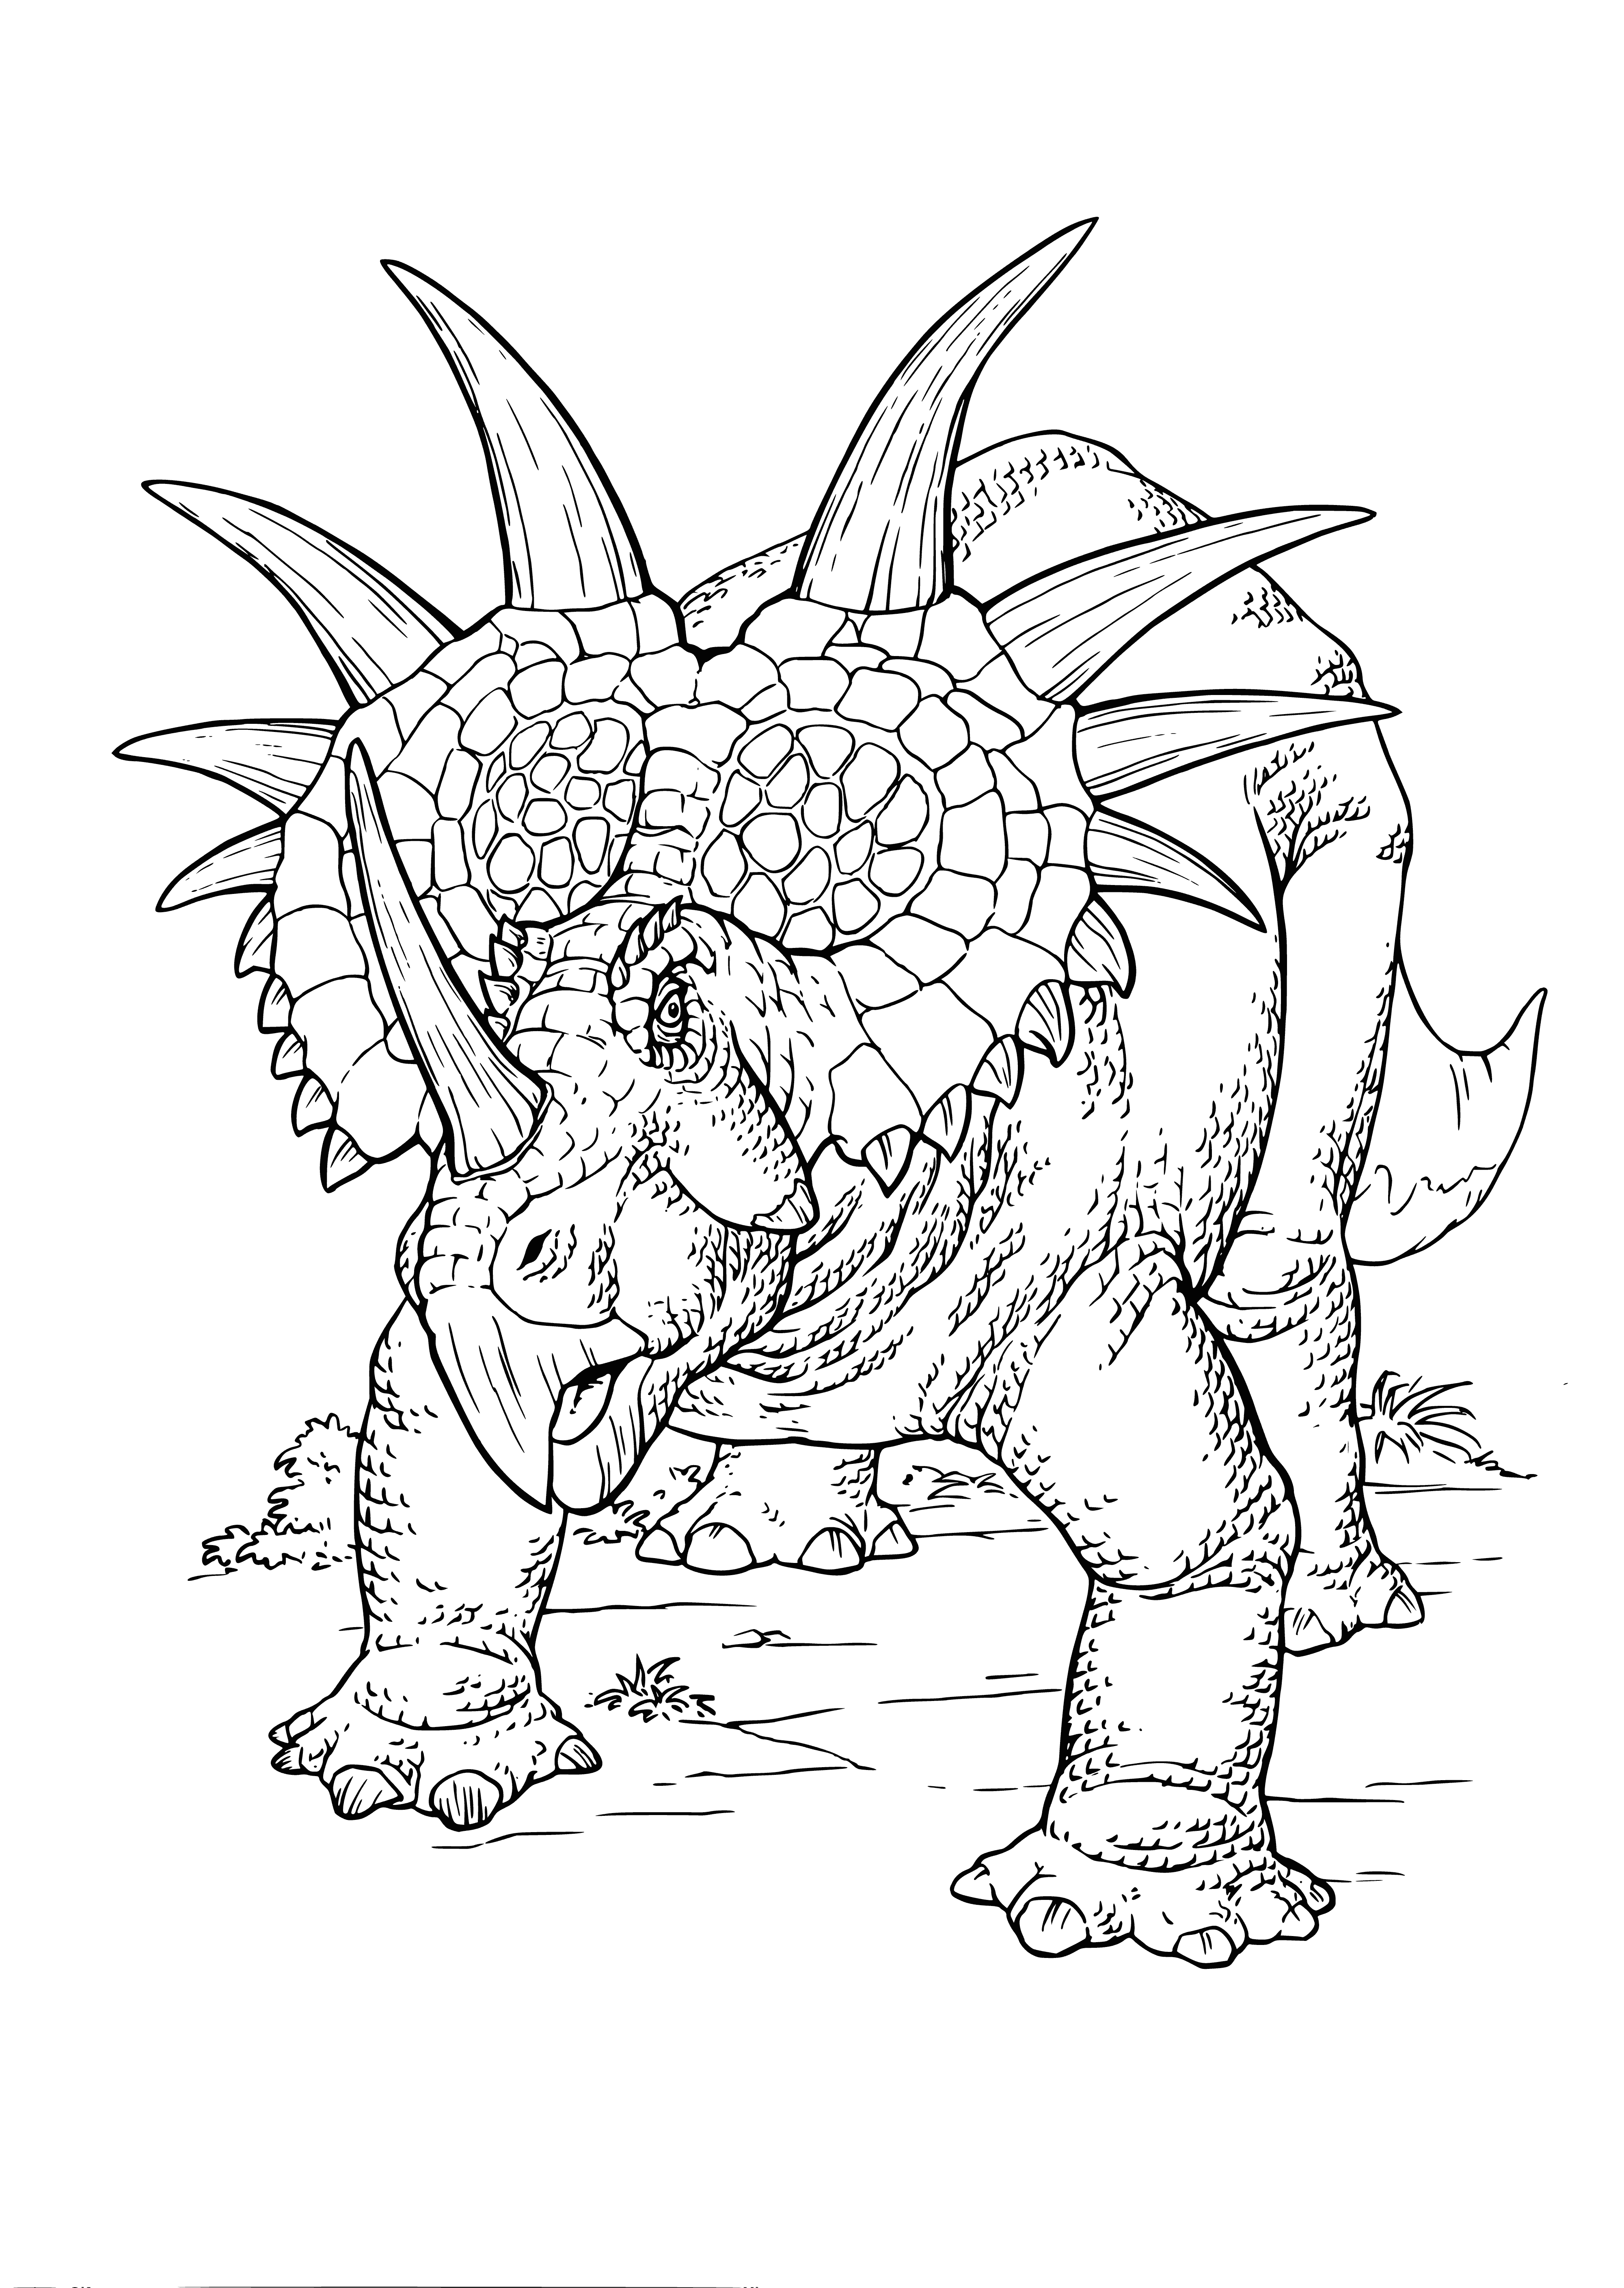 Ceratops coloring page